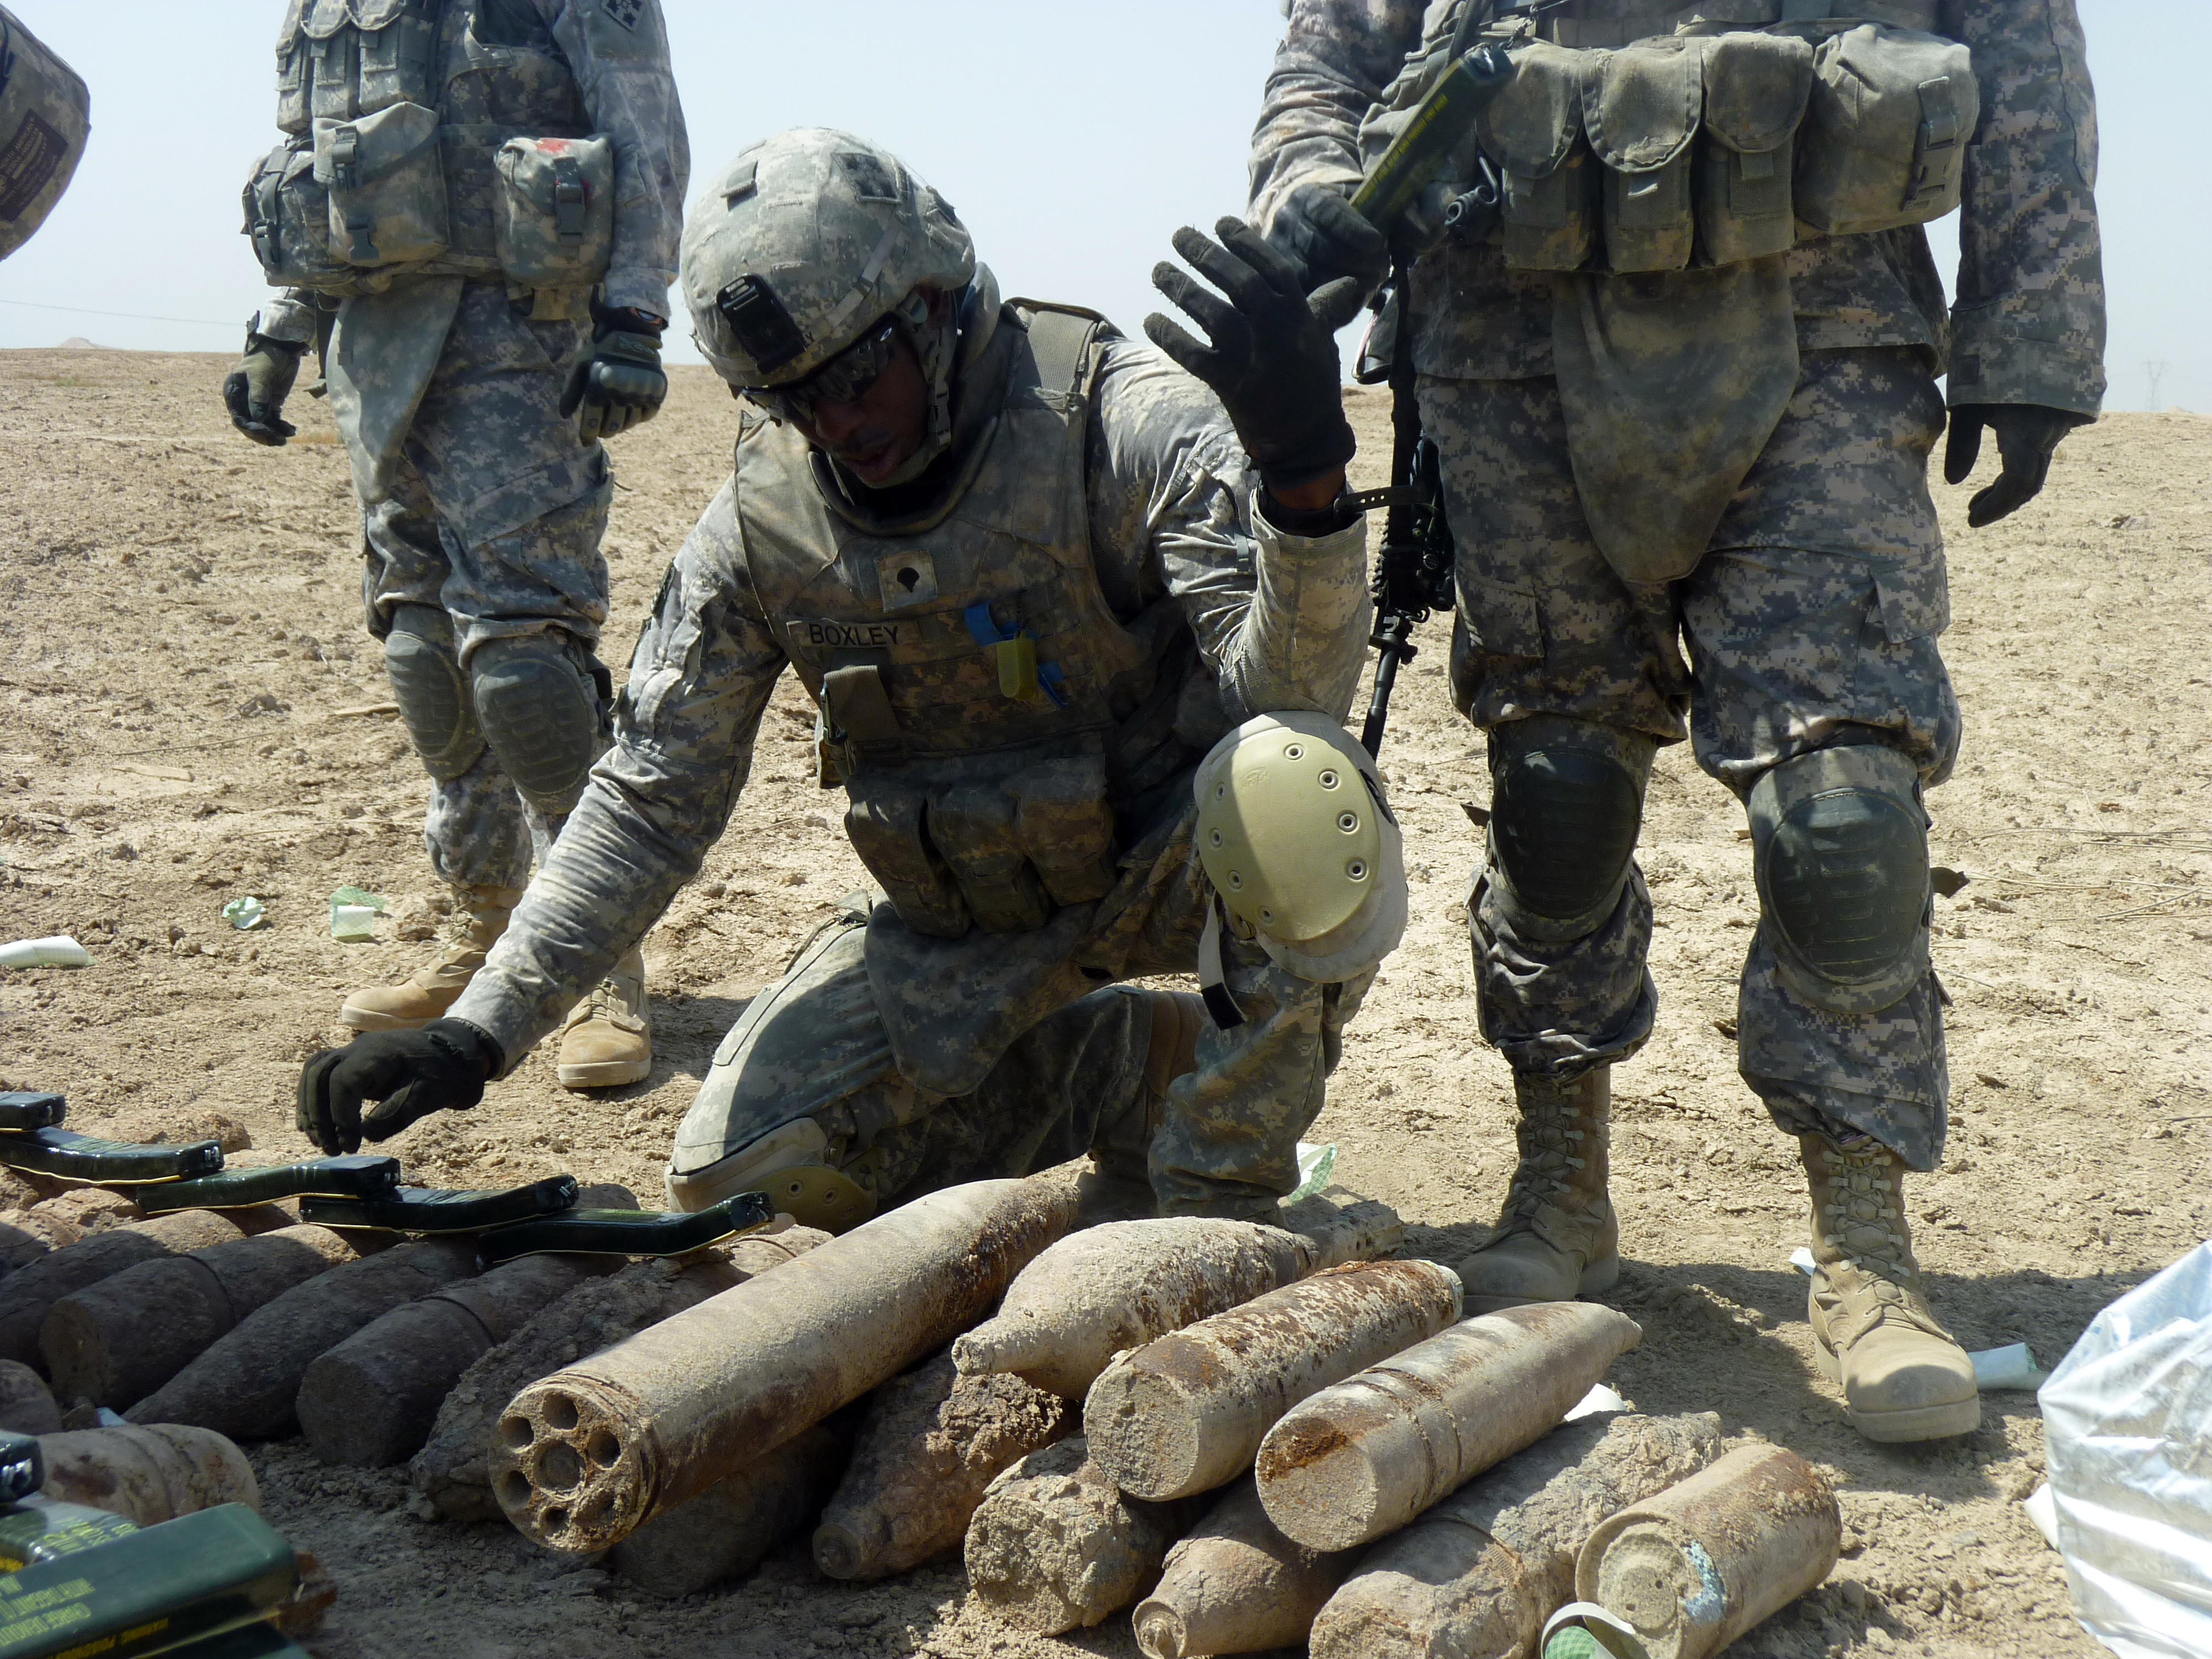 A soldier inspecting and defusing bombs in Baghdad